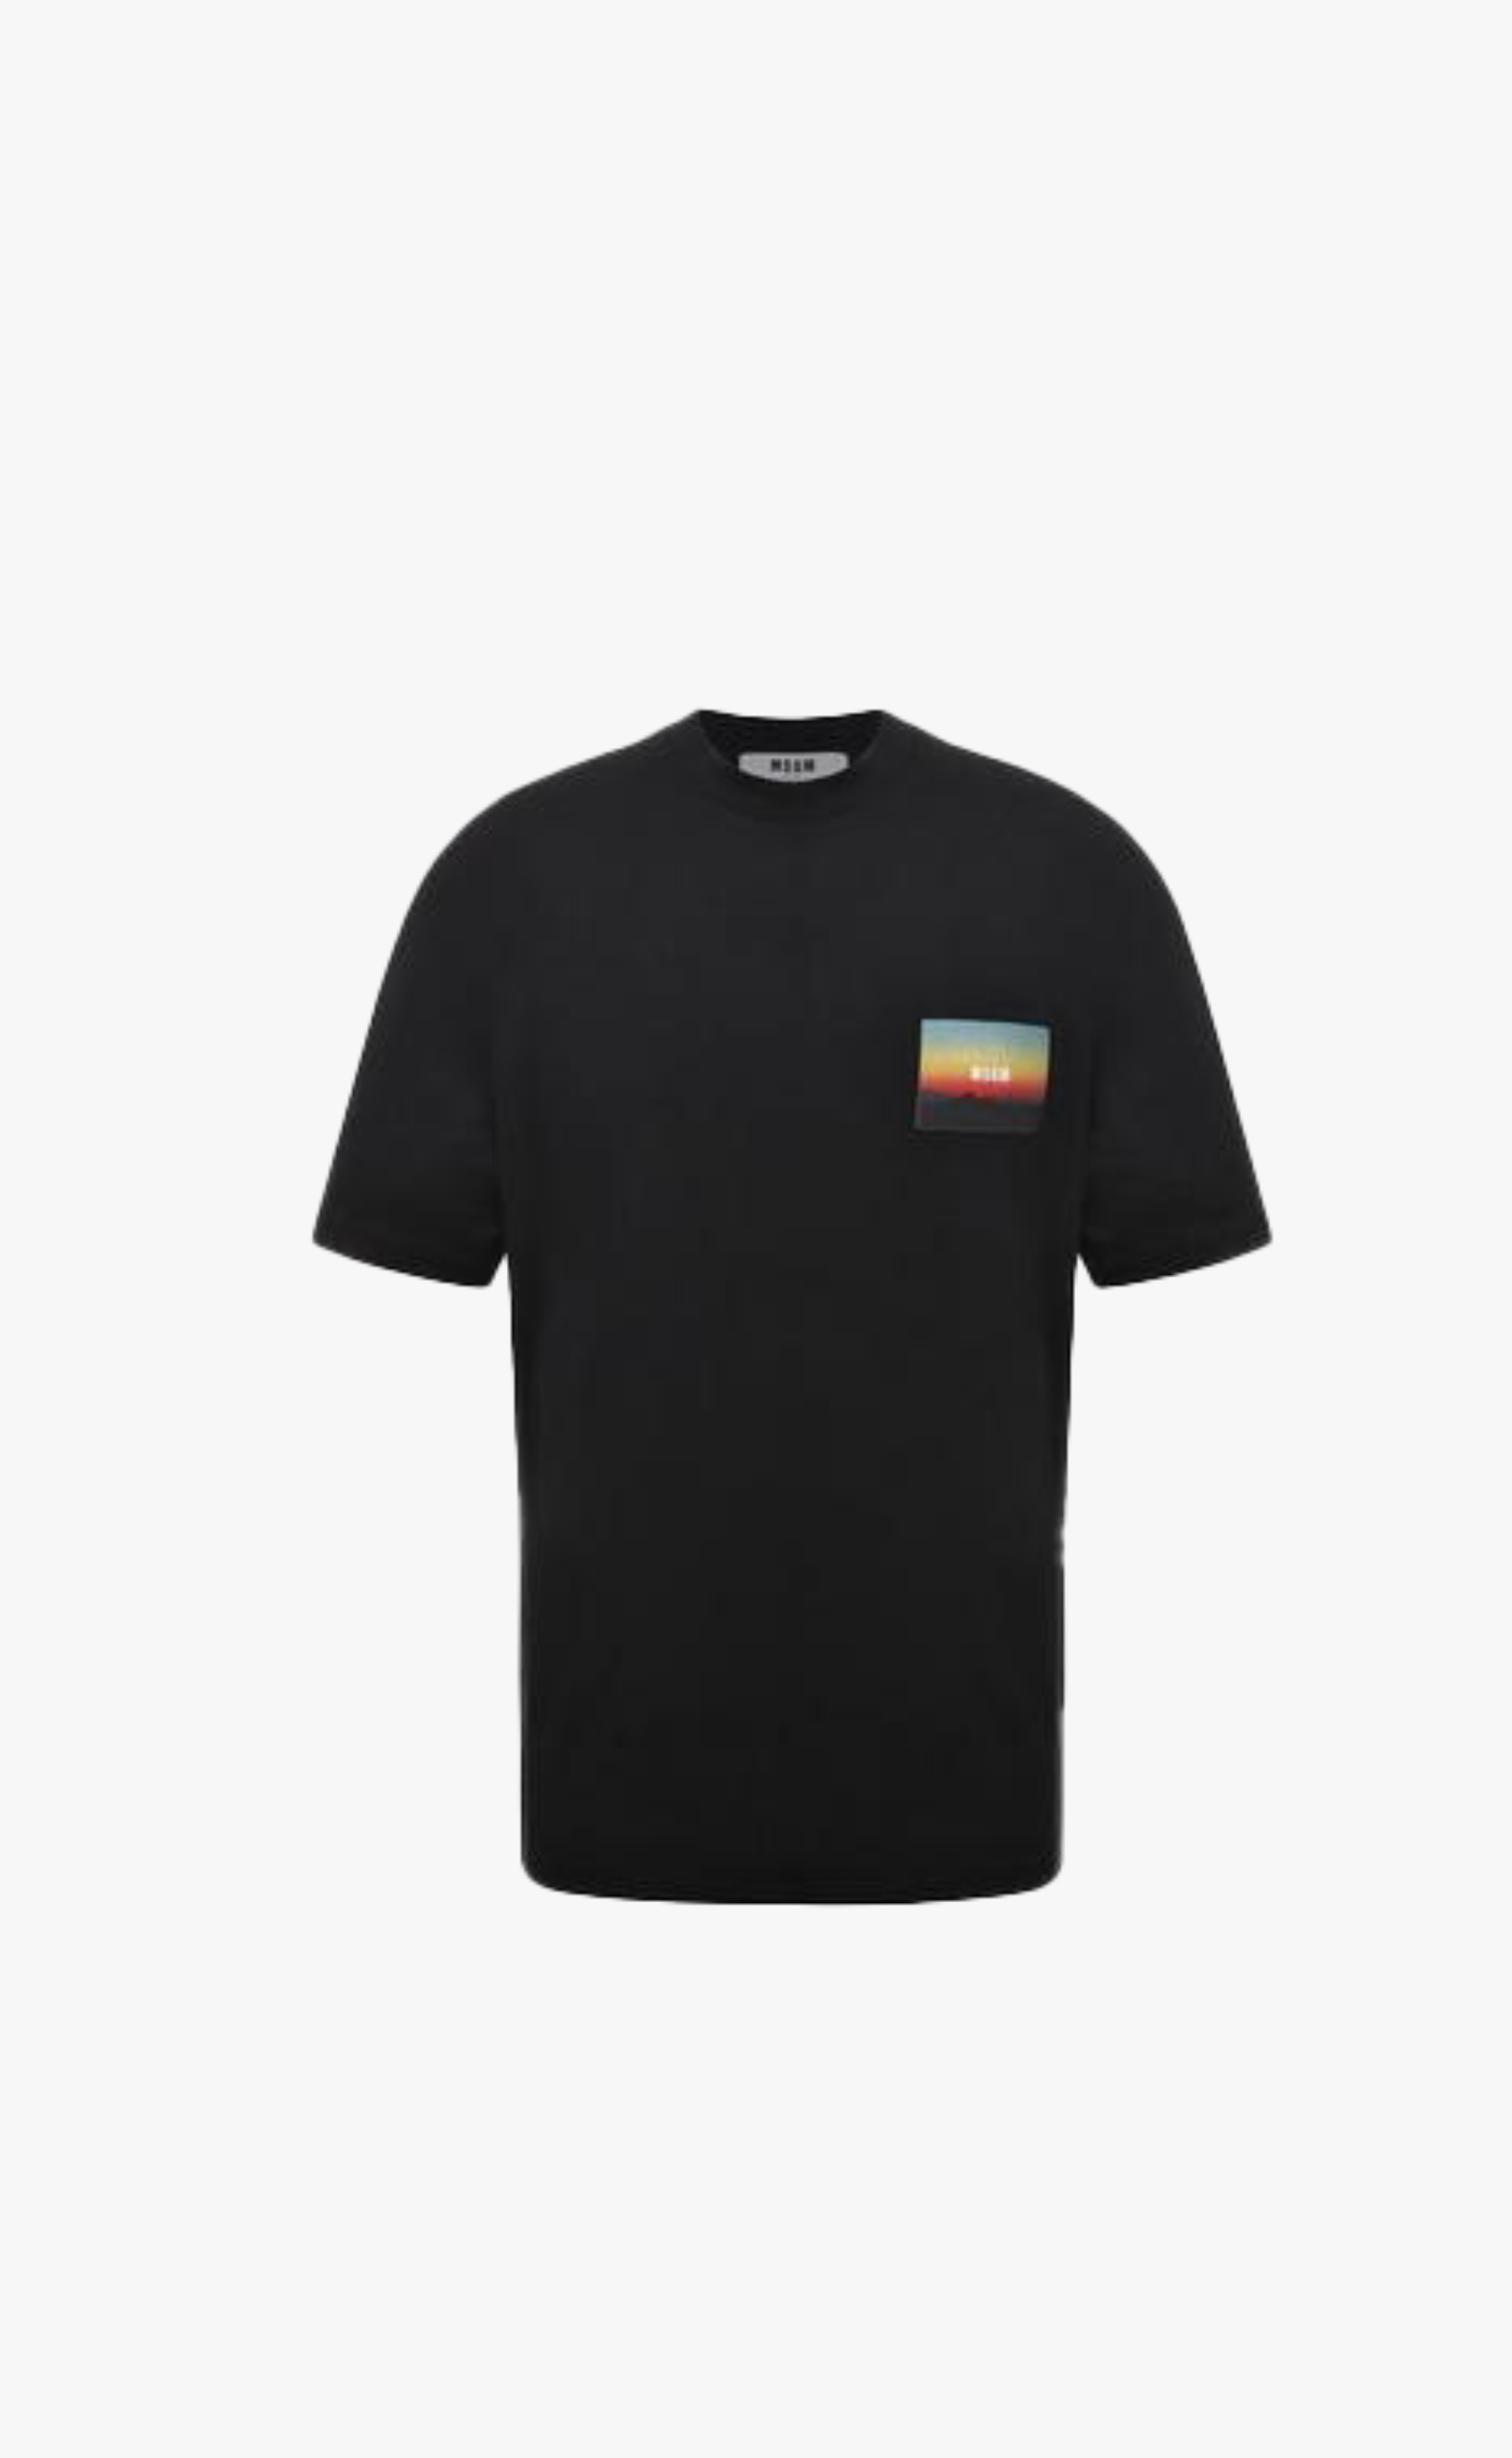 T-SHIRT WITH APPLIED SUNSET PATCH BLACK T-SHIRT